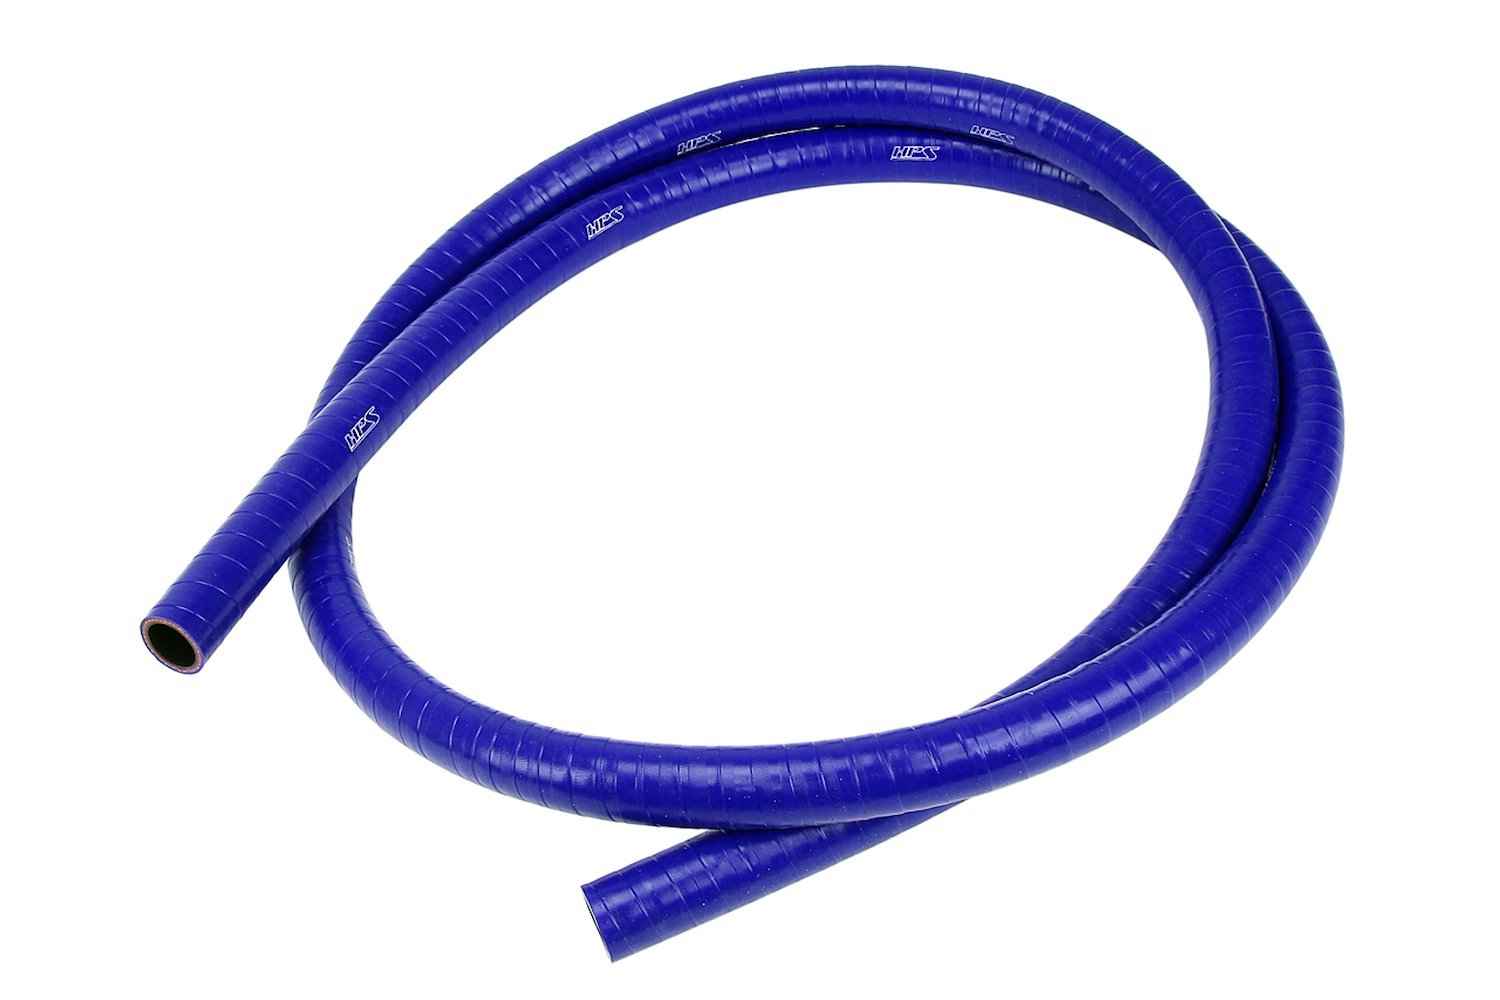 FKM-2F-075-BLUE FKM Silicone Hose, Silicone Oil Resistant Hose, High-Temp 1-Ply Reinforced, 3/4 in. ID, 2 ft. Long, Blue